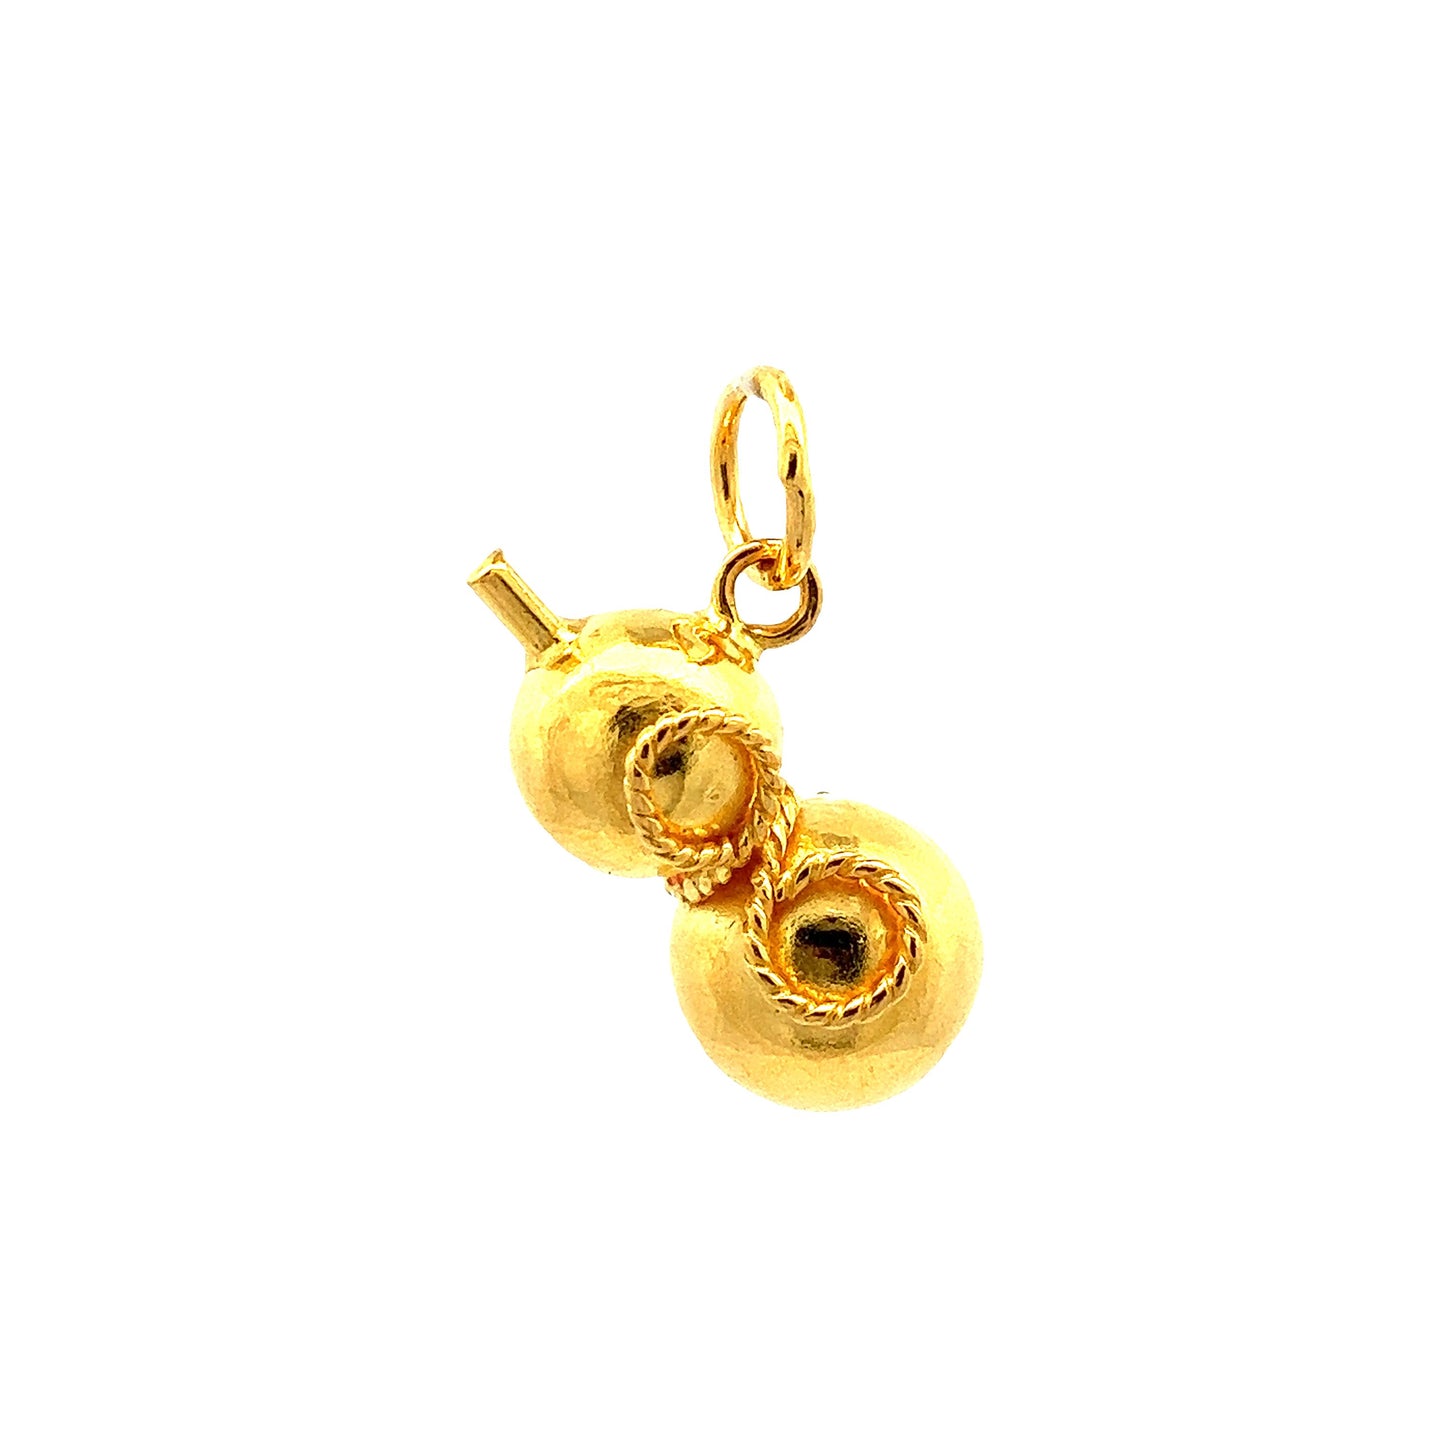 GOLD PENDANT ( 22K ) ( 2.62g ) - 0004127 Chain sold separately